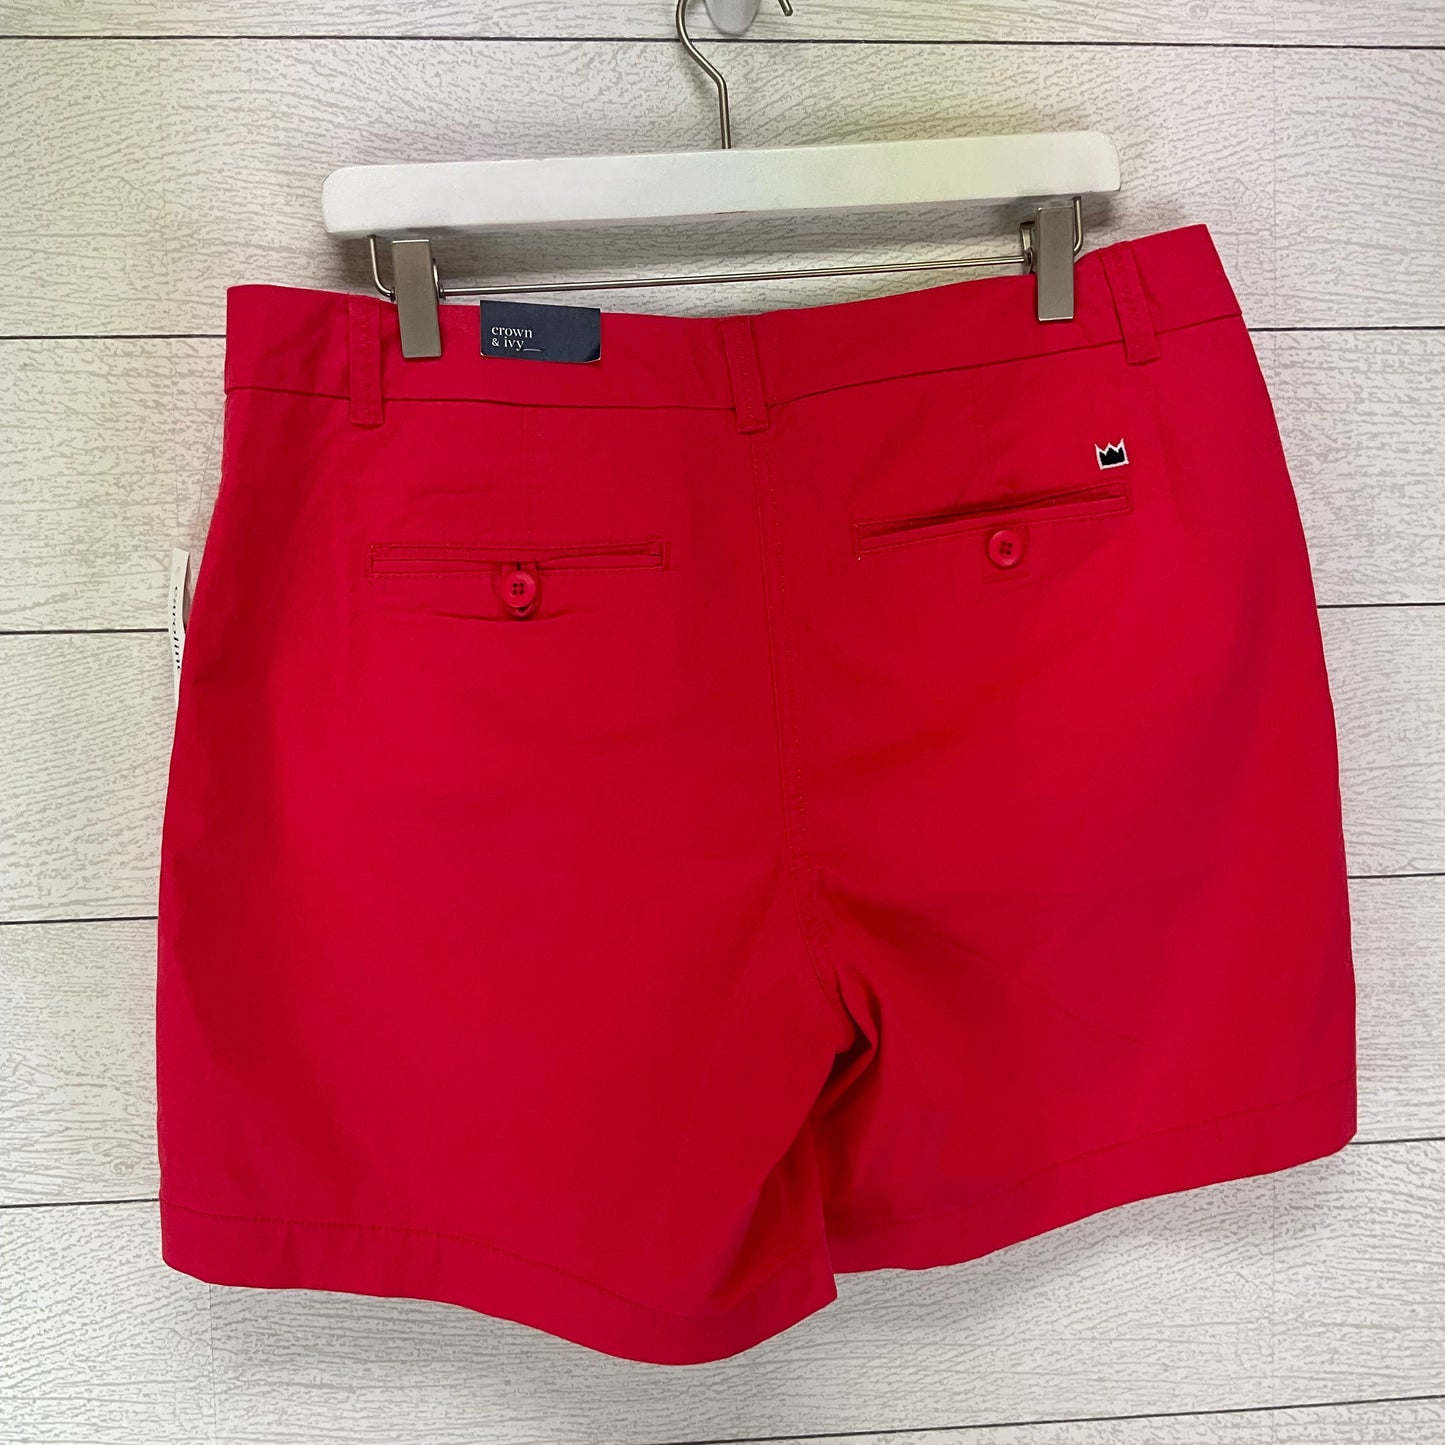 Red Shorts Crown And Ivy, Size 10